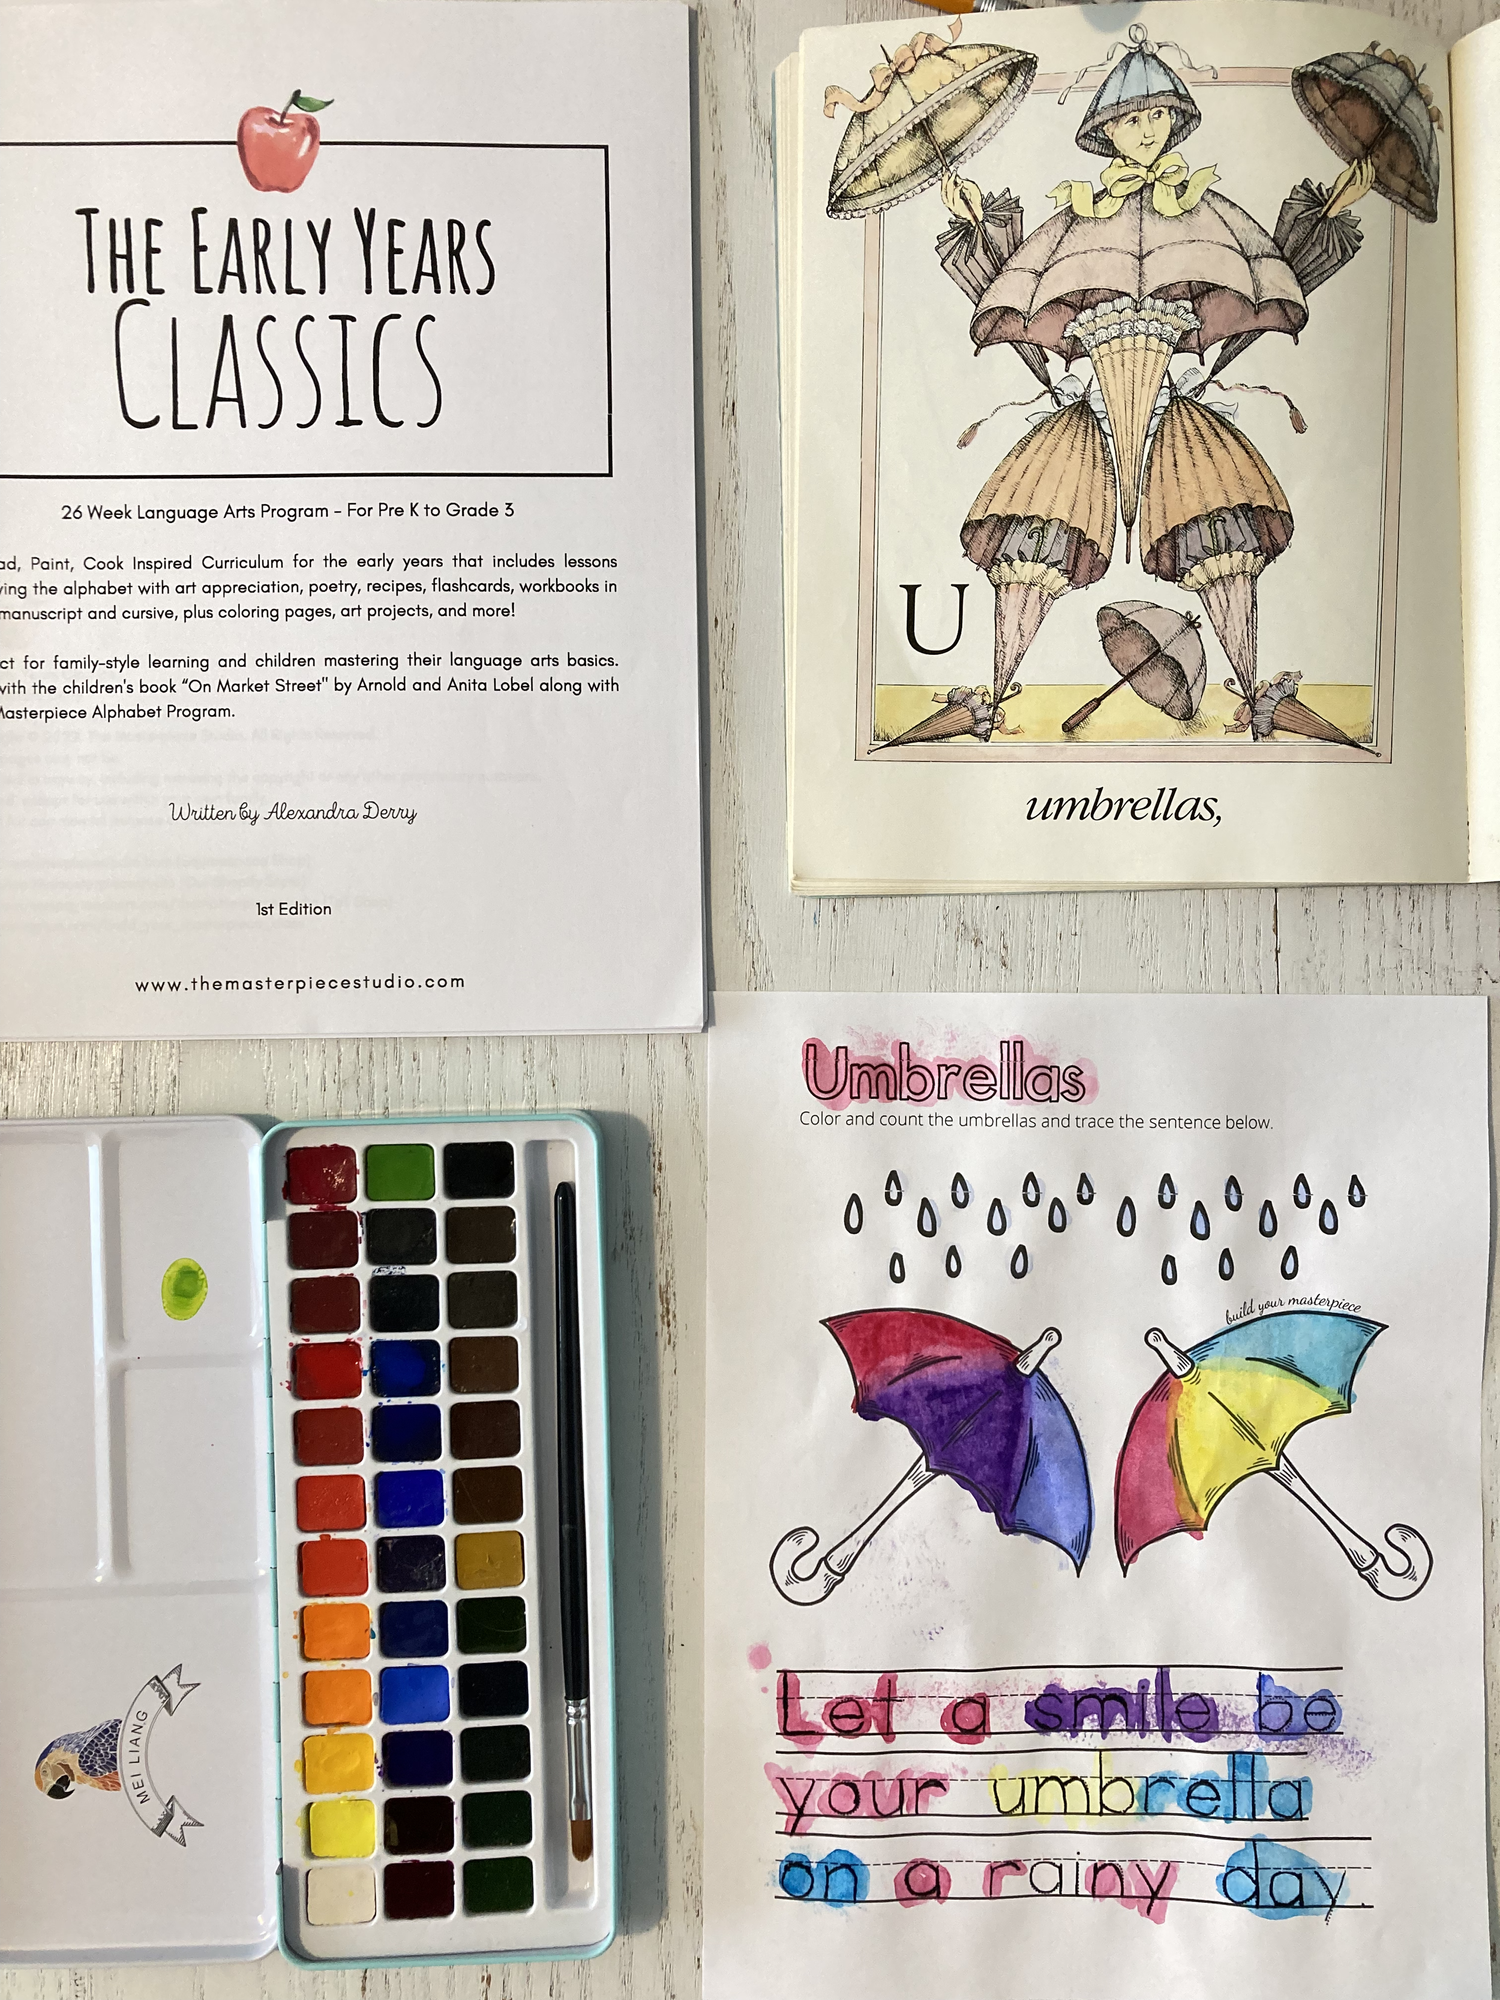 The Early Years Classics - 26 Week Language Arts Program - For PreK to Grade 3